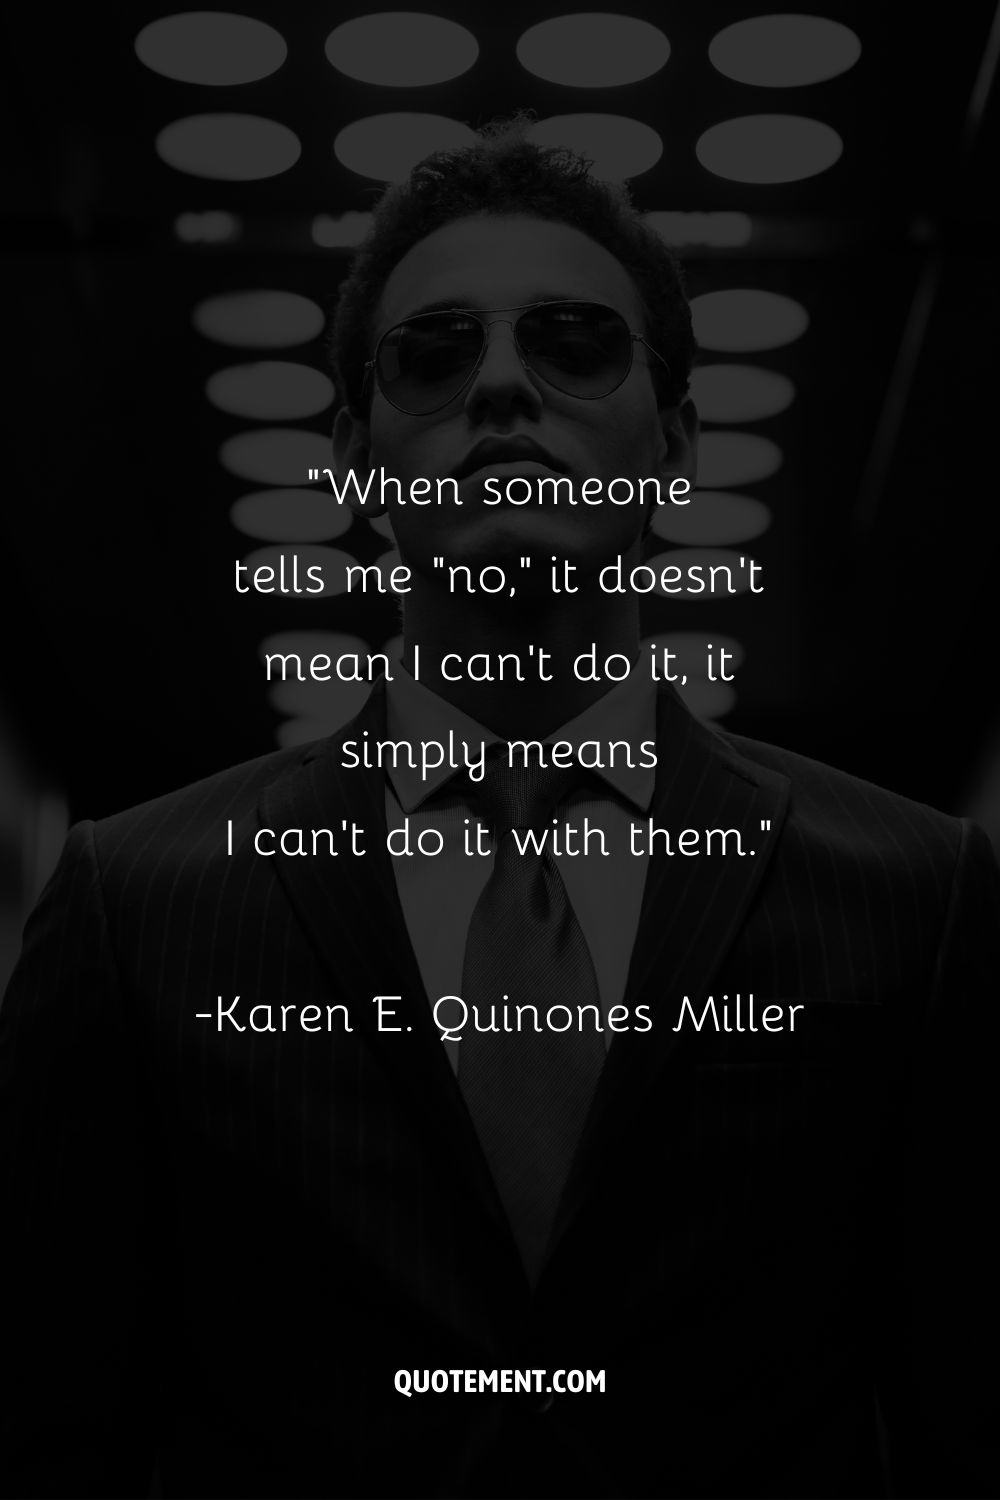 “When someone tells me no, it doesn't mean I can't do it, it simply means I can't do it with them.”